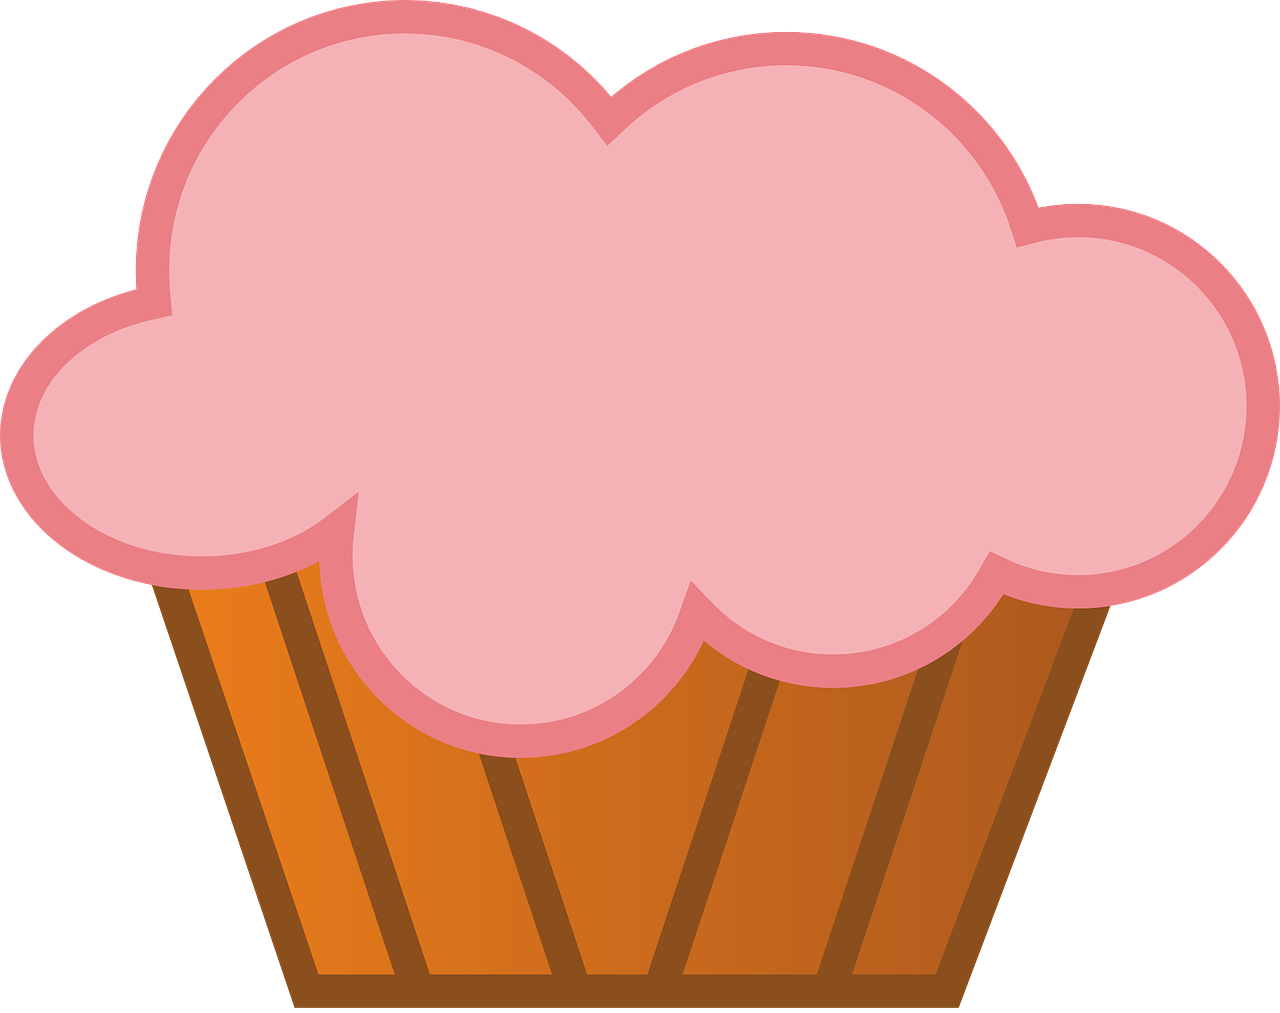 A Cupcake With Pink Frosting